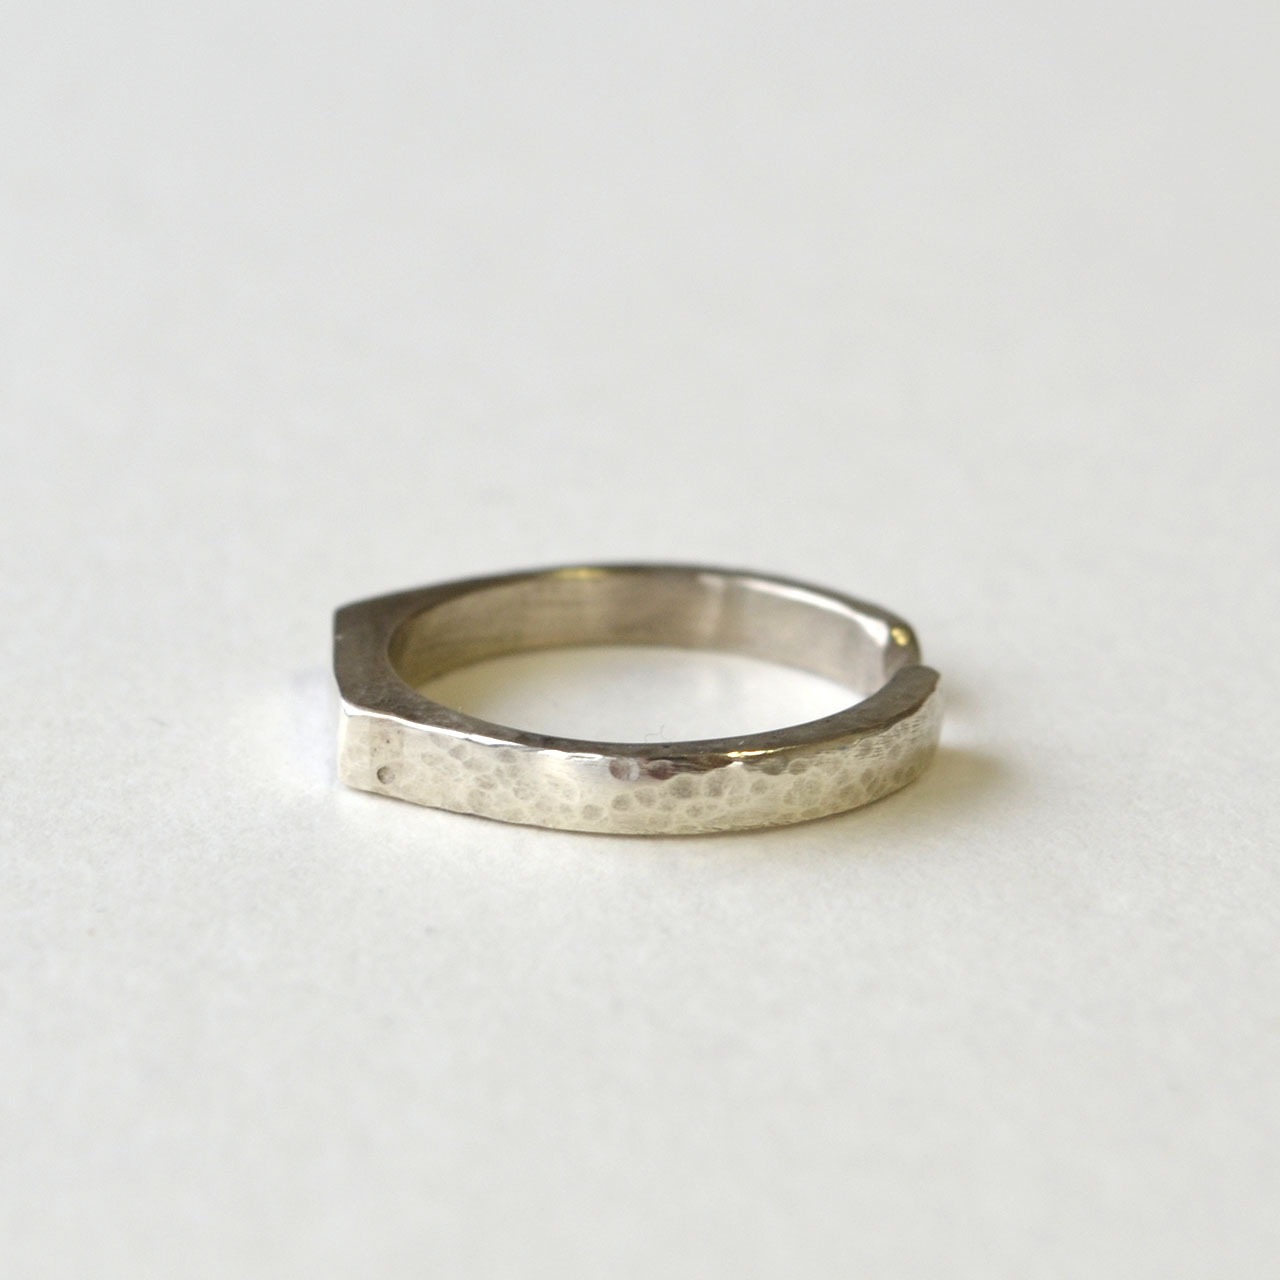 Square Narrow Open Ring